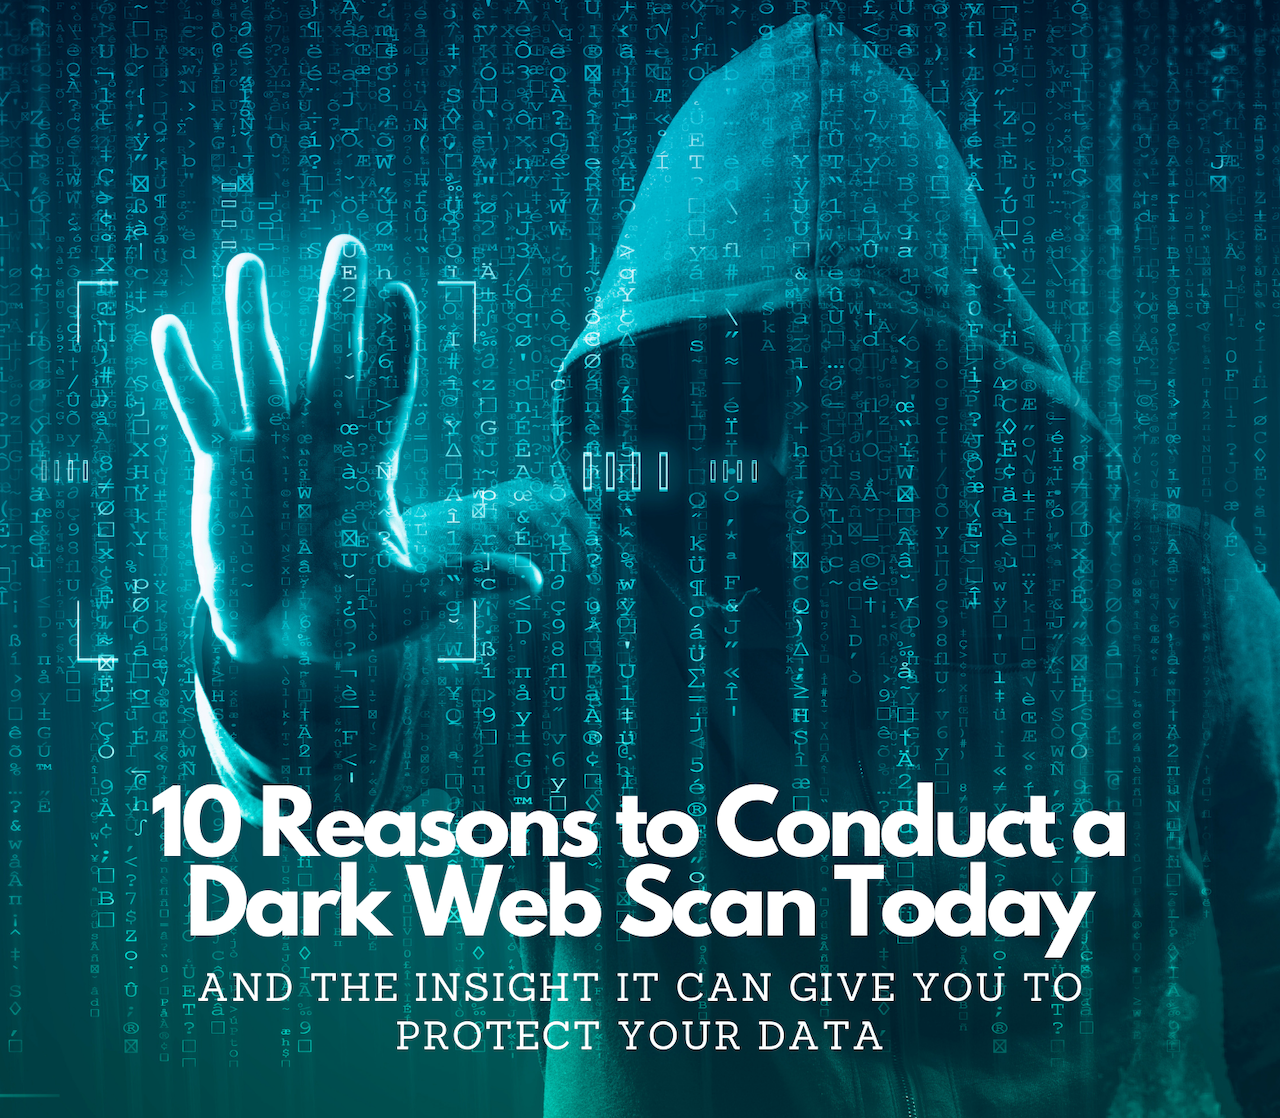 10 reasons to conduct a dark web scan today